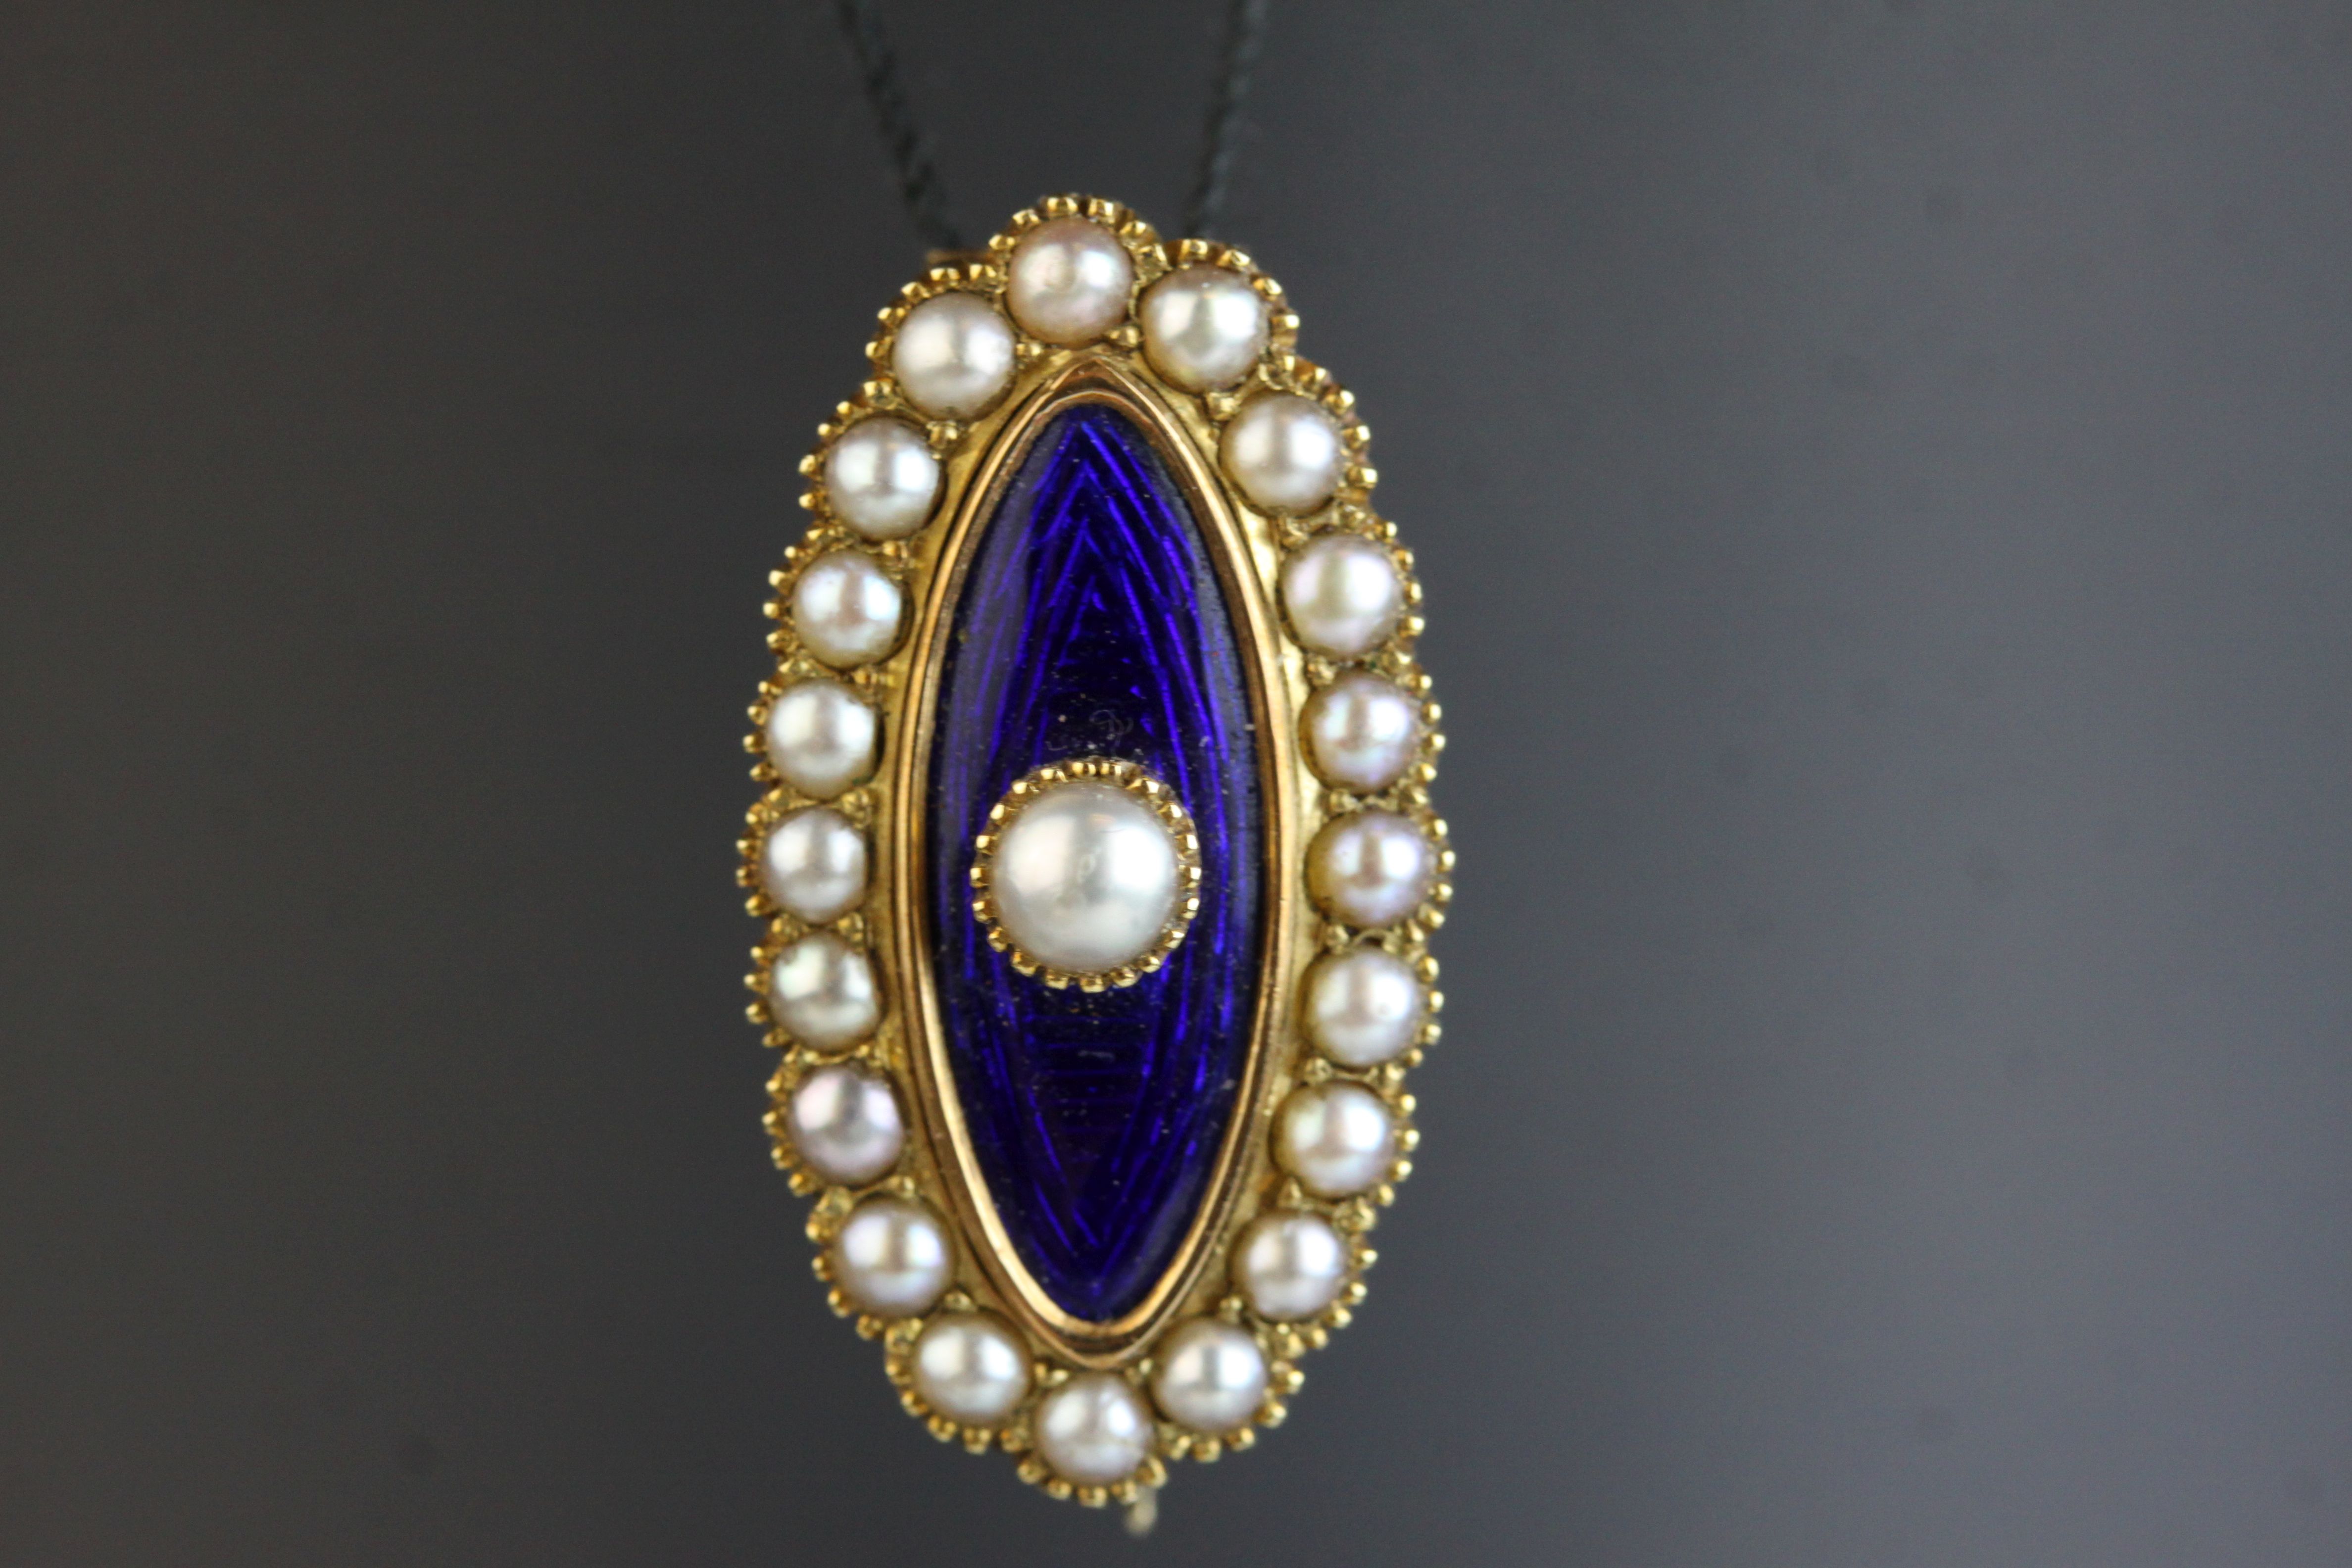 Edwardian pearl and enamelled unmarked yellow gold lace pin, the central blue enamelled marquise